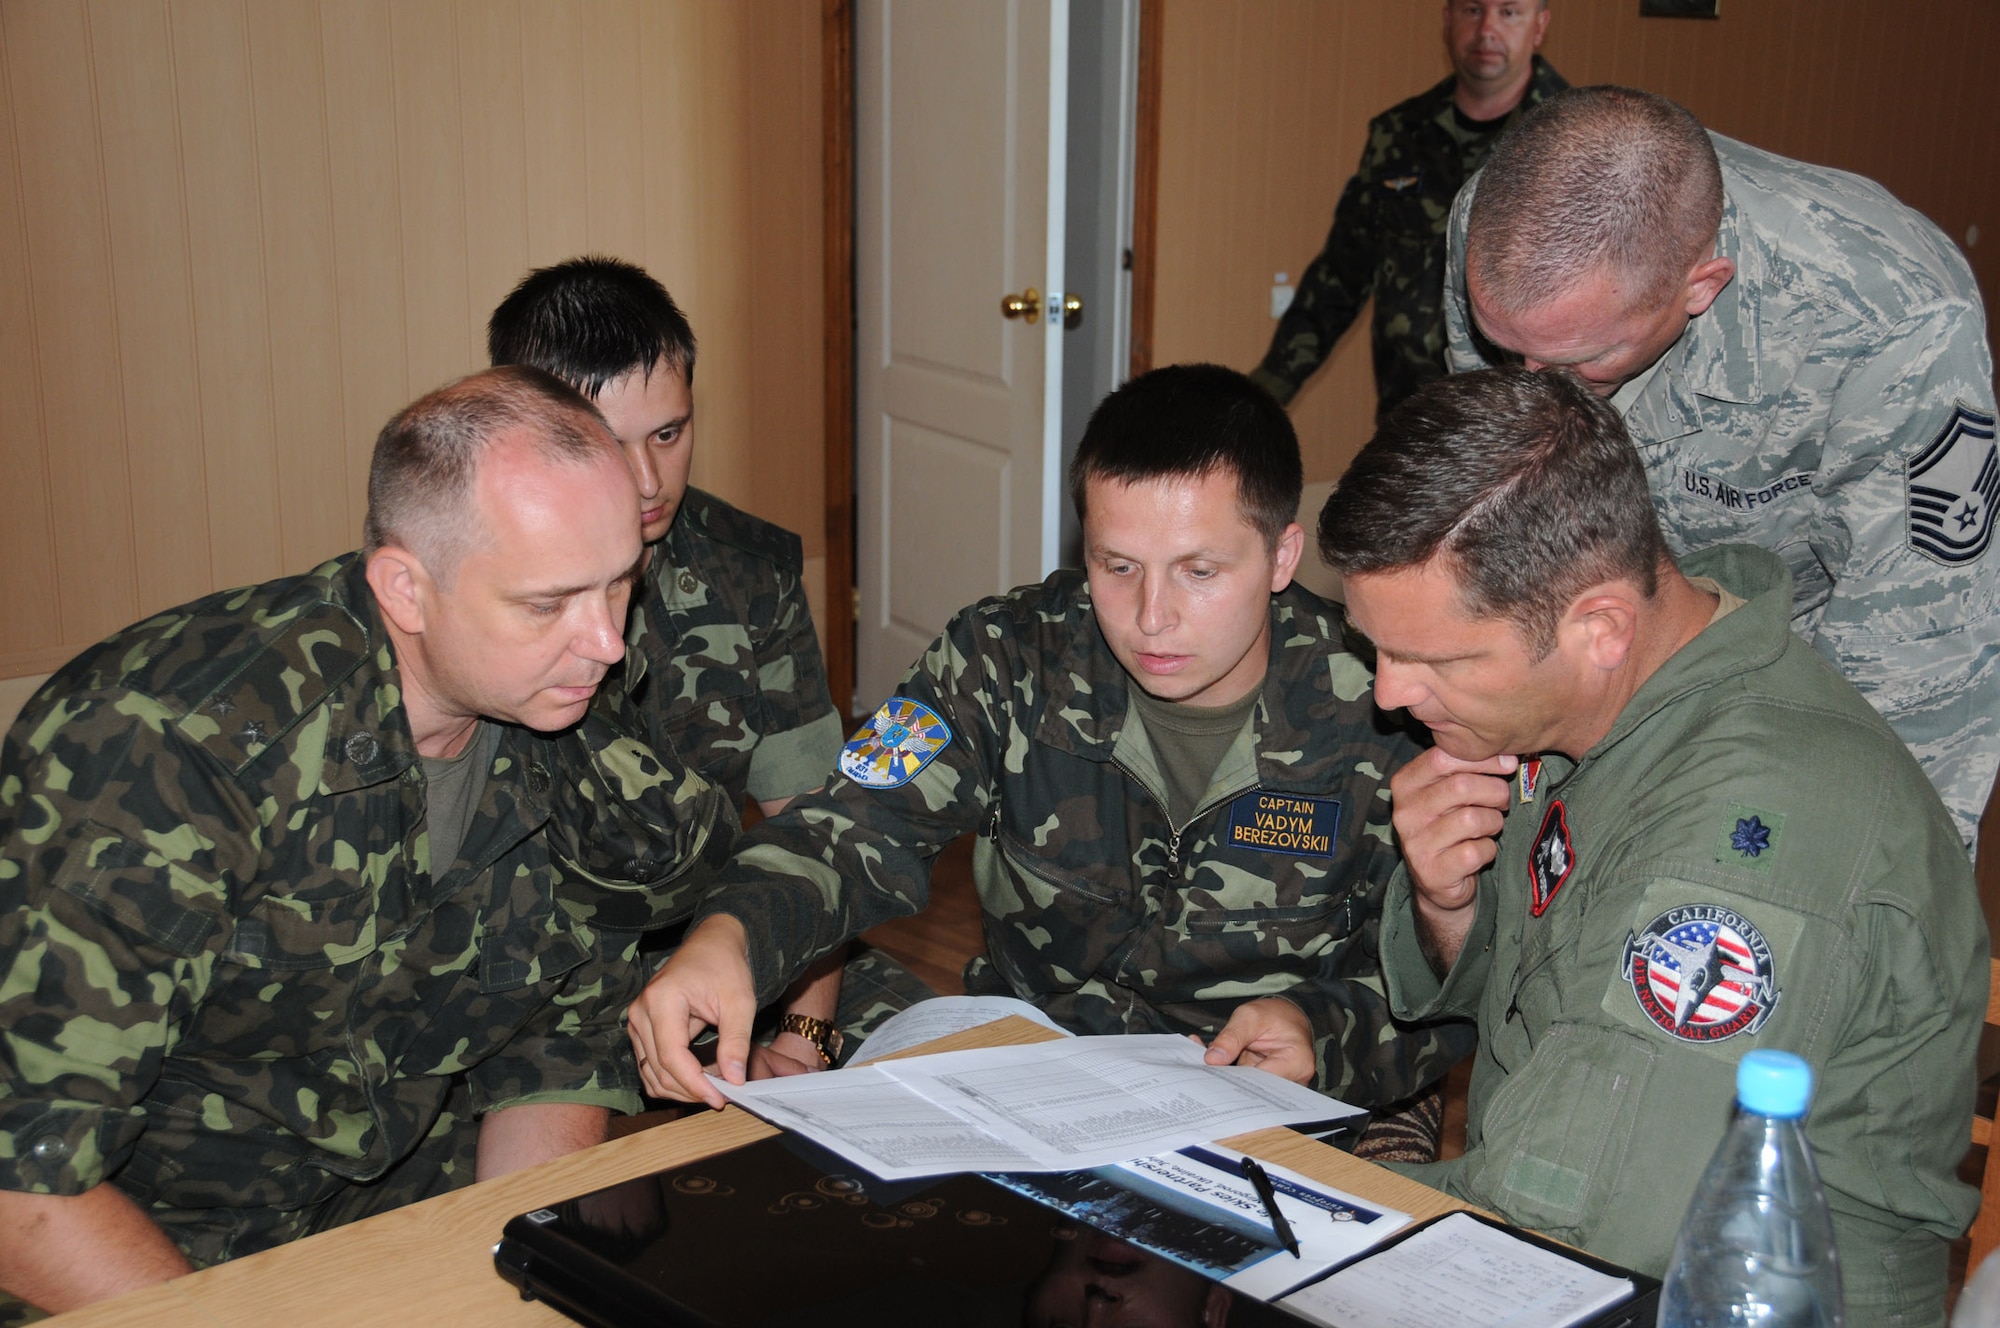 Lt. Col. Robert Swertfager, from the California Air National Guard’s 144th Fighter Wing in Fresno, discusses the itinerary for SAFE SKIES 2011 with his Ukrainian counterparts July 16, 2011.  SAFE SKIES 2011 is a military-to-military exchange between airmen from the U.S., Ukraine and Poland to enhance airspace security over the Ukraine and Poland in preparation for EURO 2012, the European soccer championship games. (U. S. Air Force photo/Tech. Sgt. Charles Vaughn)